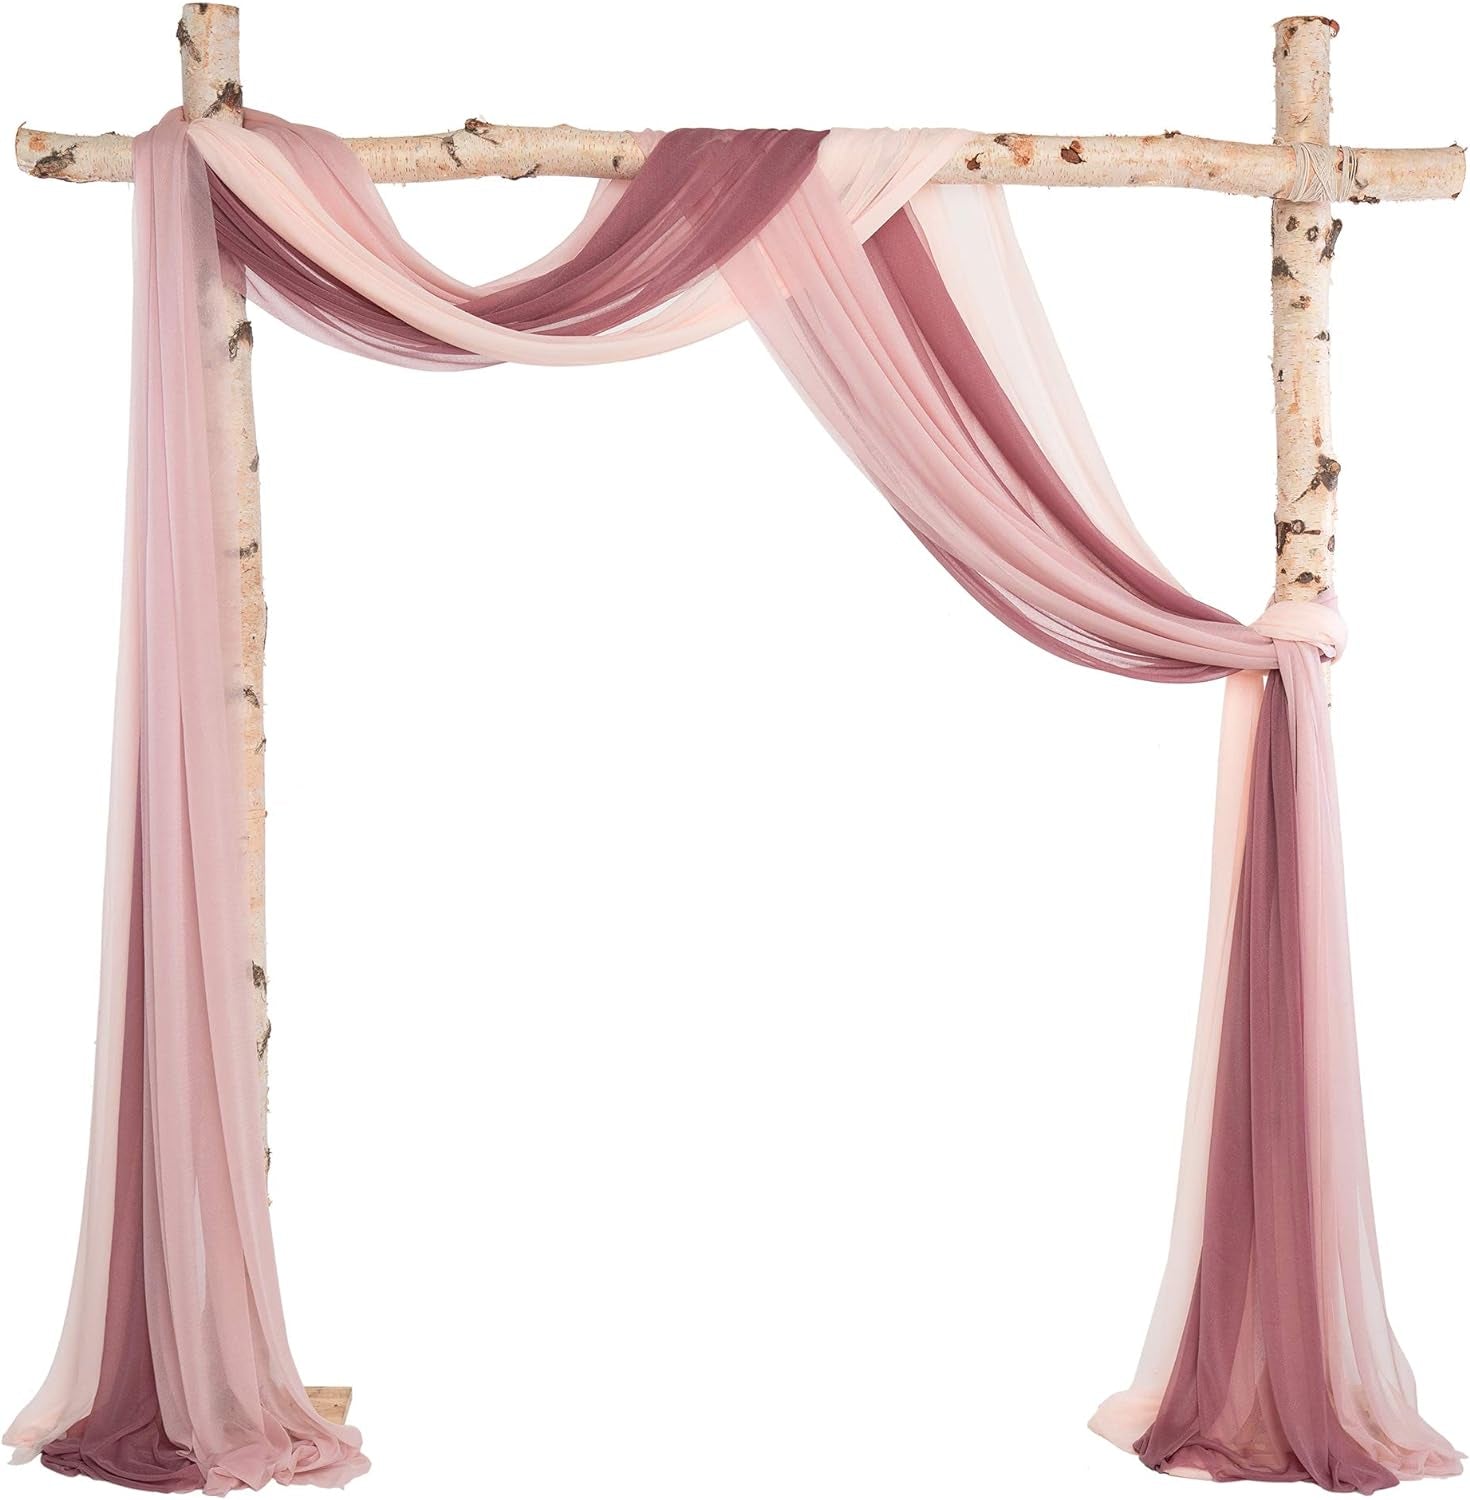 Ling'S Moment 3 Panels 20Ft Wedding Arch Chiffon Draping Fabric, Sheer Hanging Drapes Arrangement for Wedding Ceremony Reception Backdrop Outdoors Party Swag Home Decor (Dusty Rose & Burgundy & Blush)